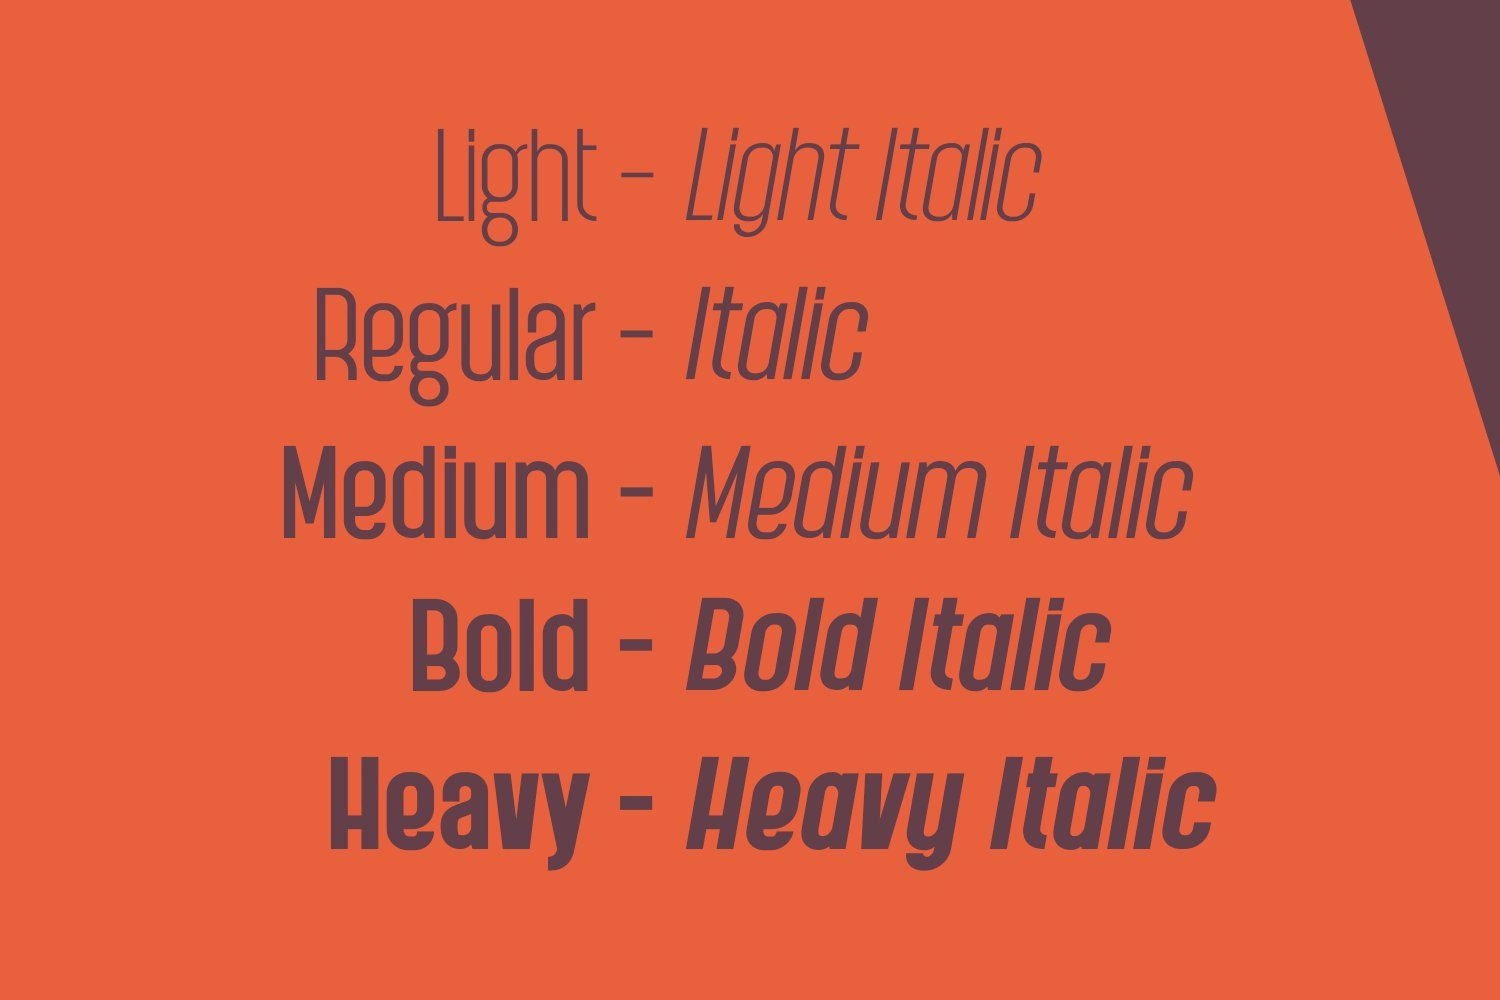 Hypop Italic Font preview